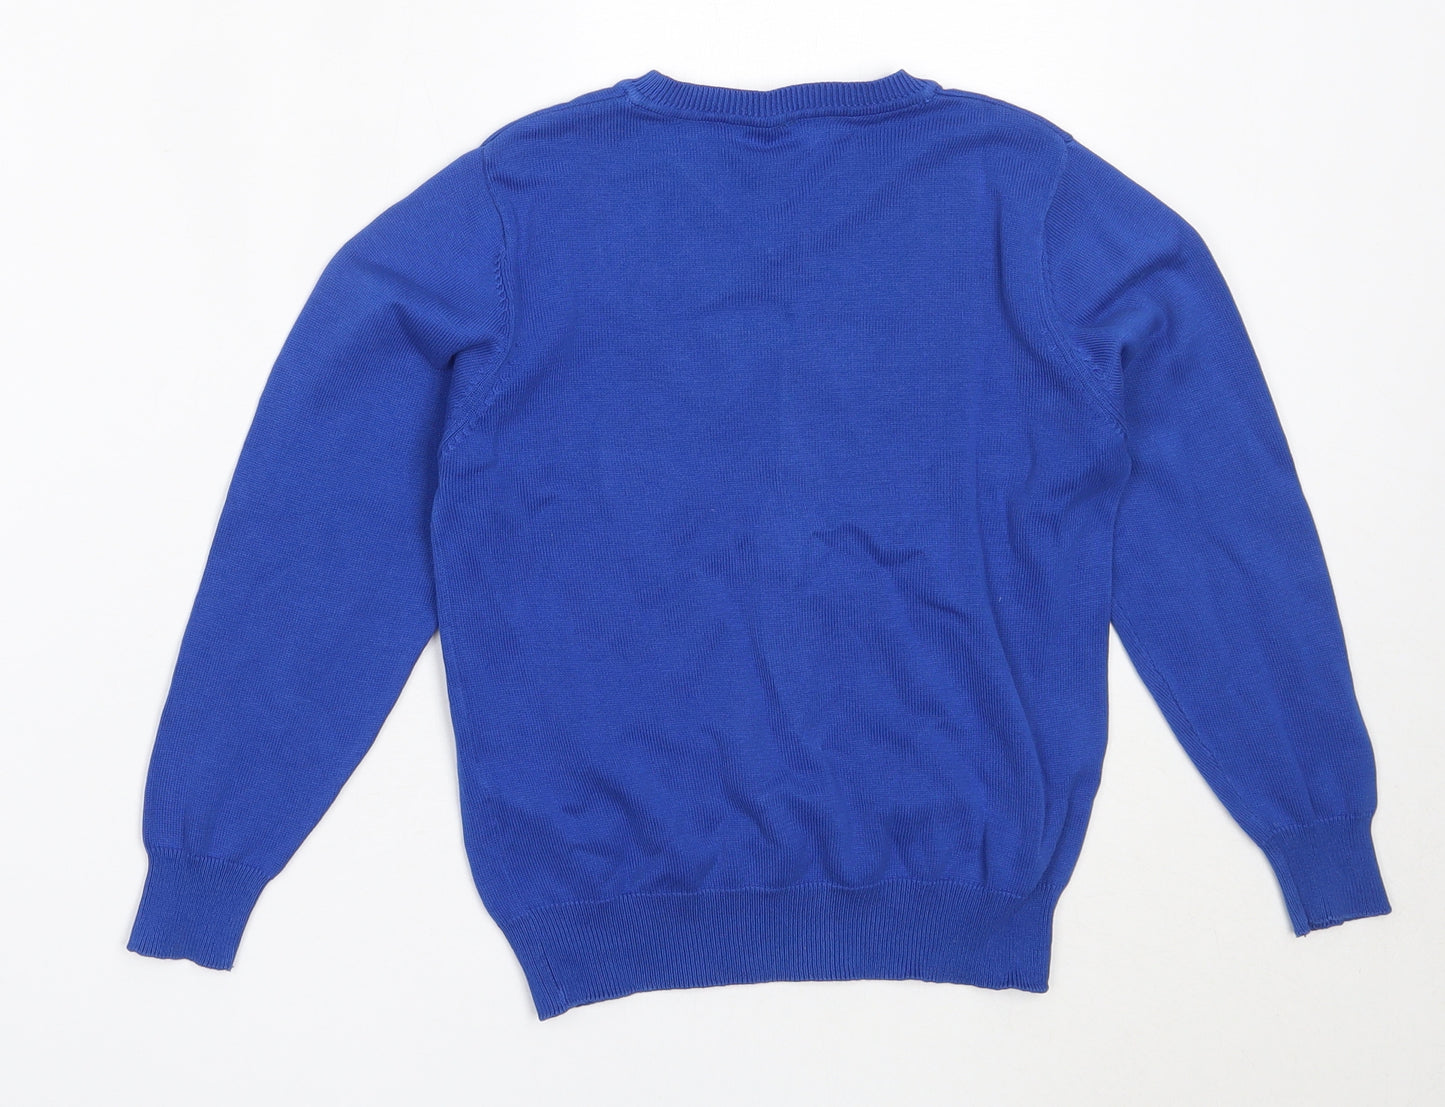 George Boys Blue V-Neck  Cotton Pullover Jumper Size 5-6 Years